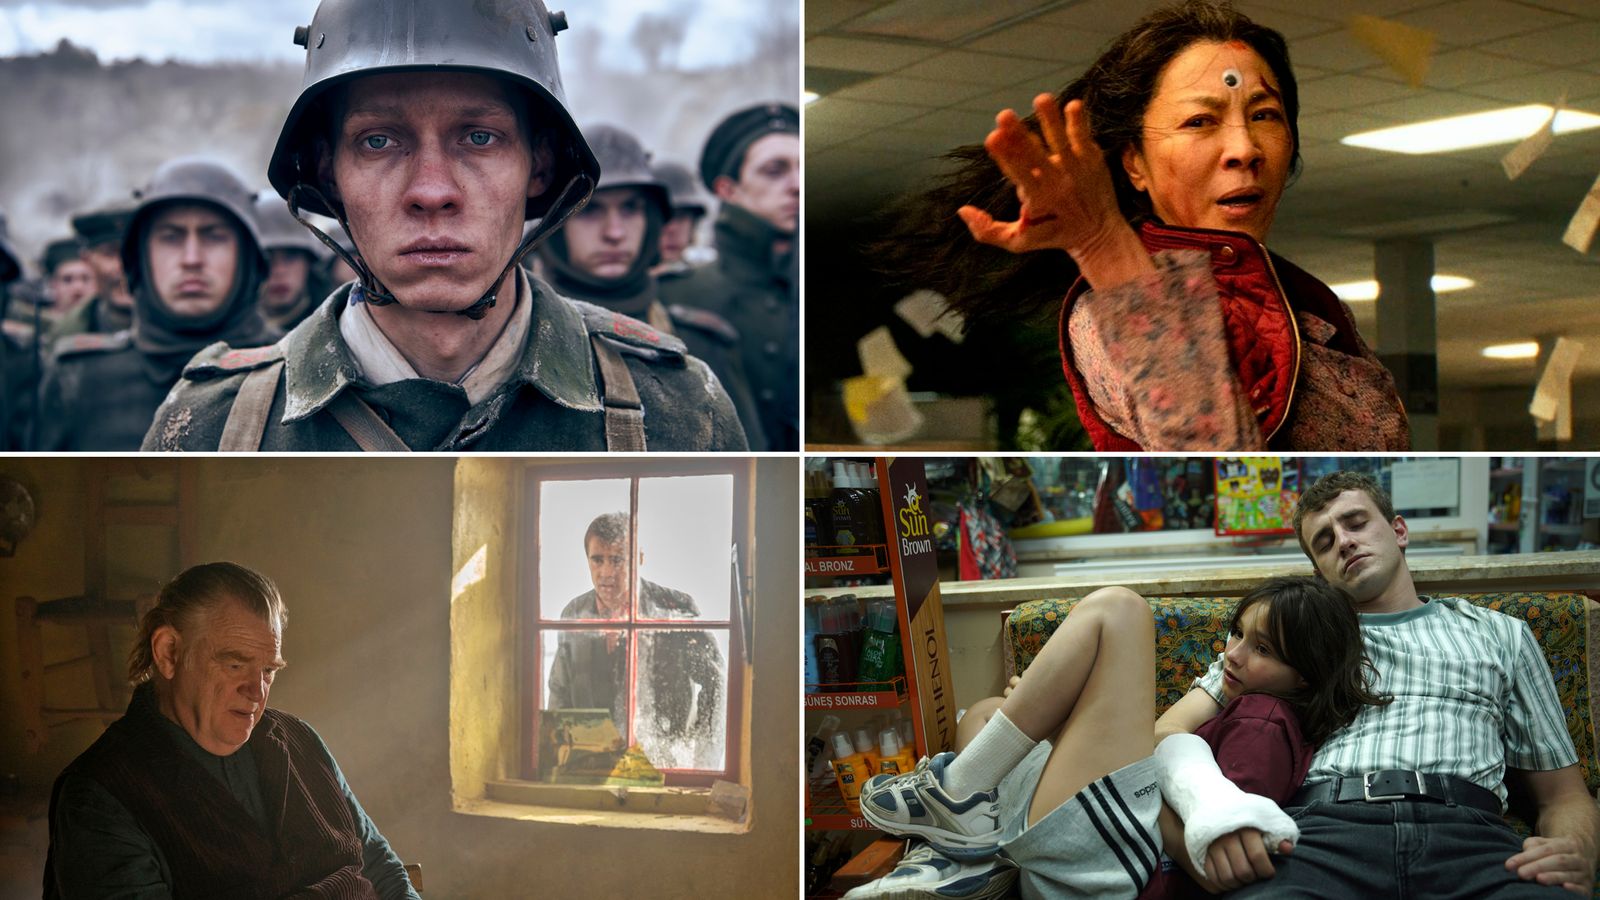 BAFTAs 2023: All Quiet On The Western Front leads the nominations - as Irish talent also shines